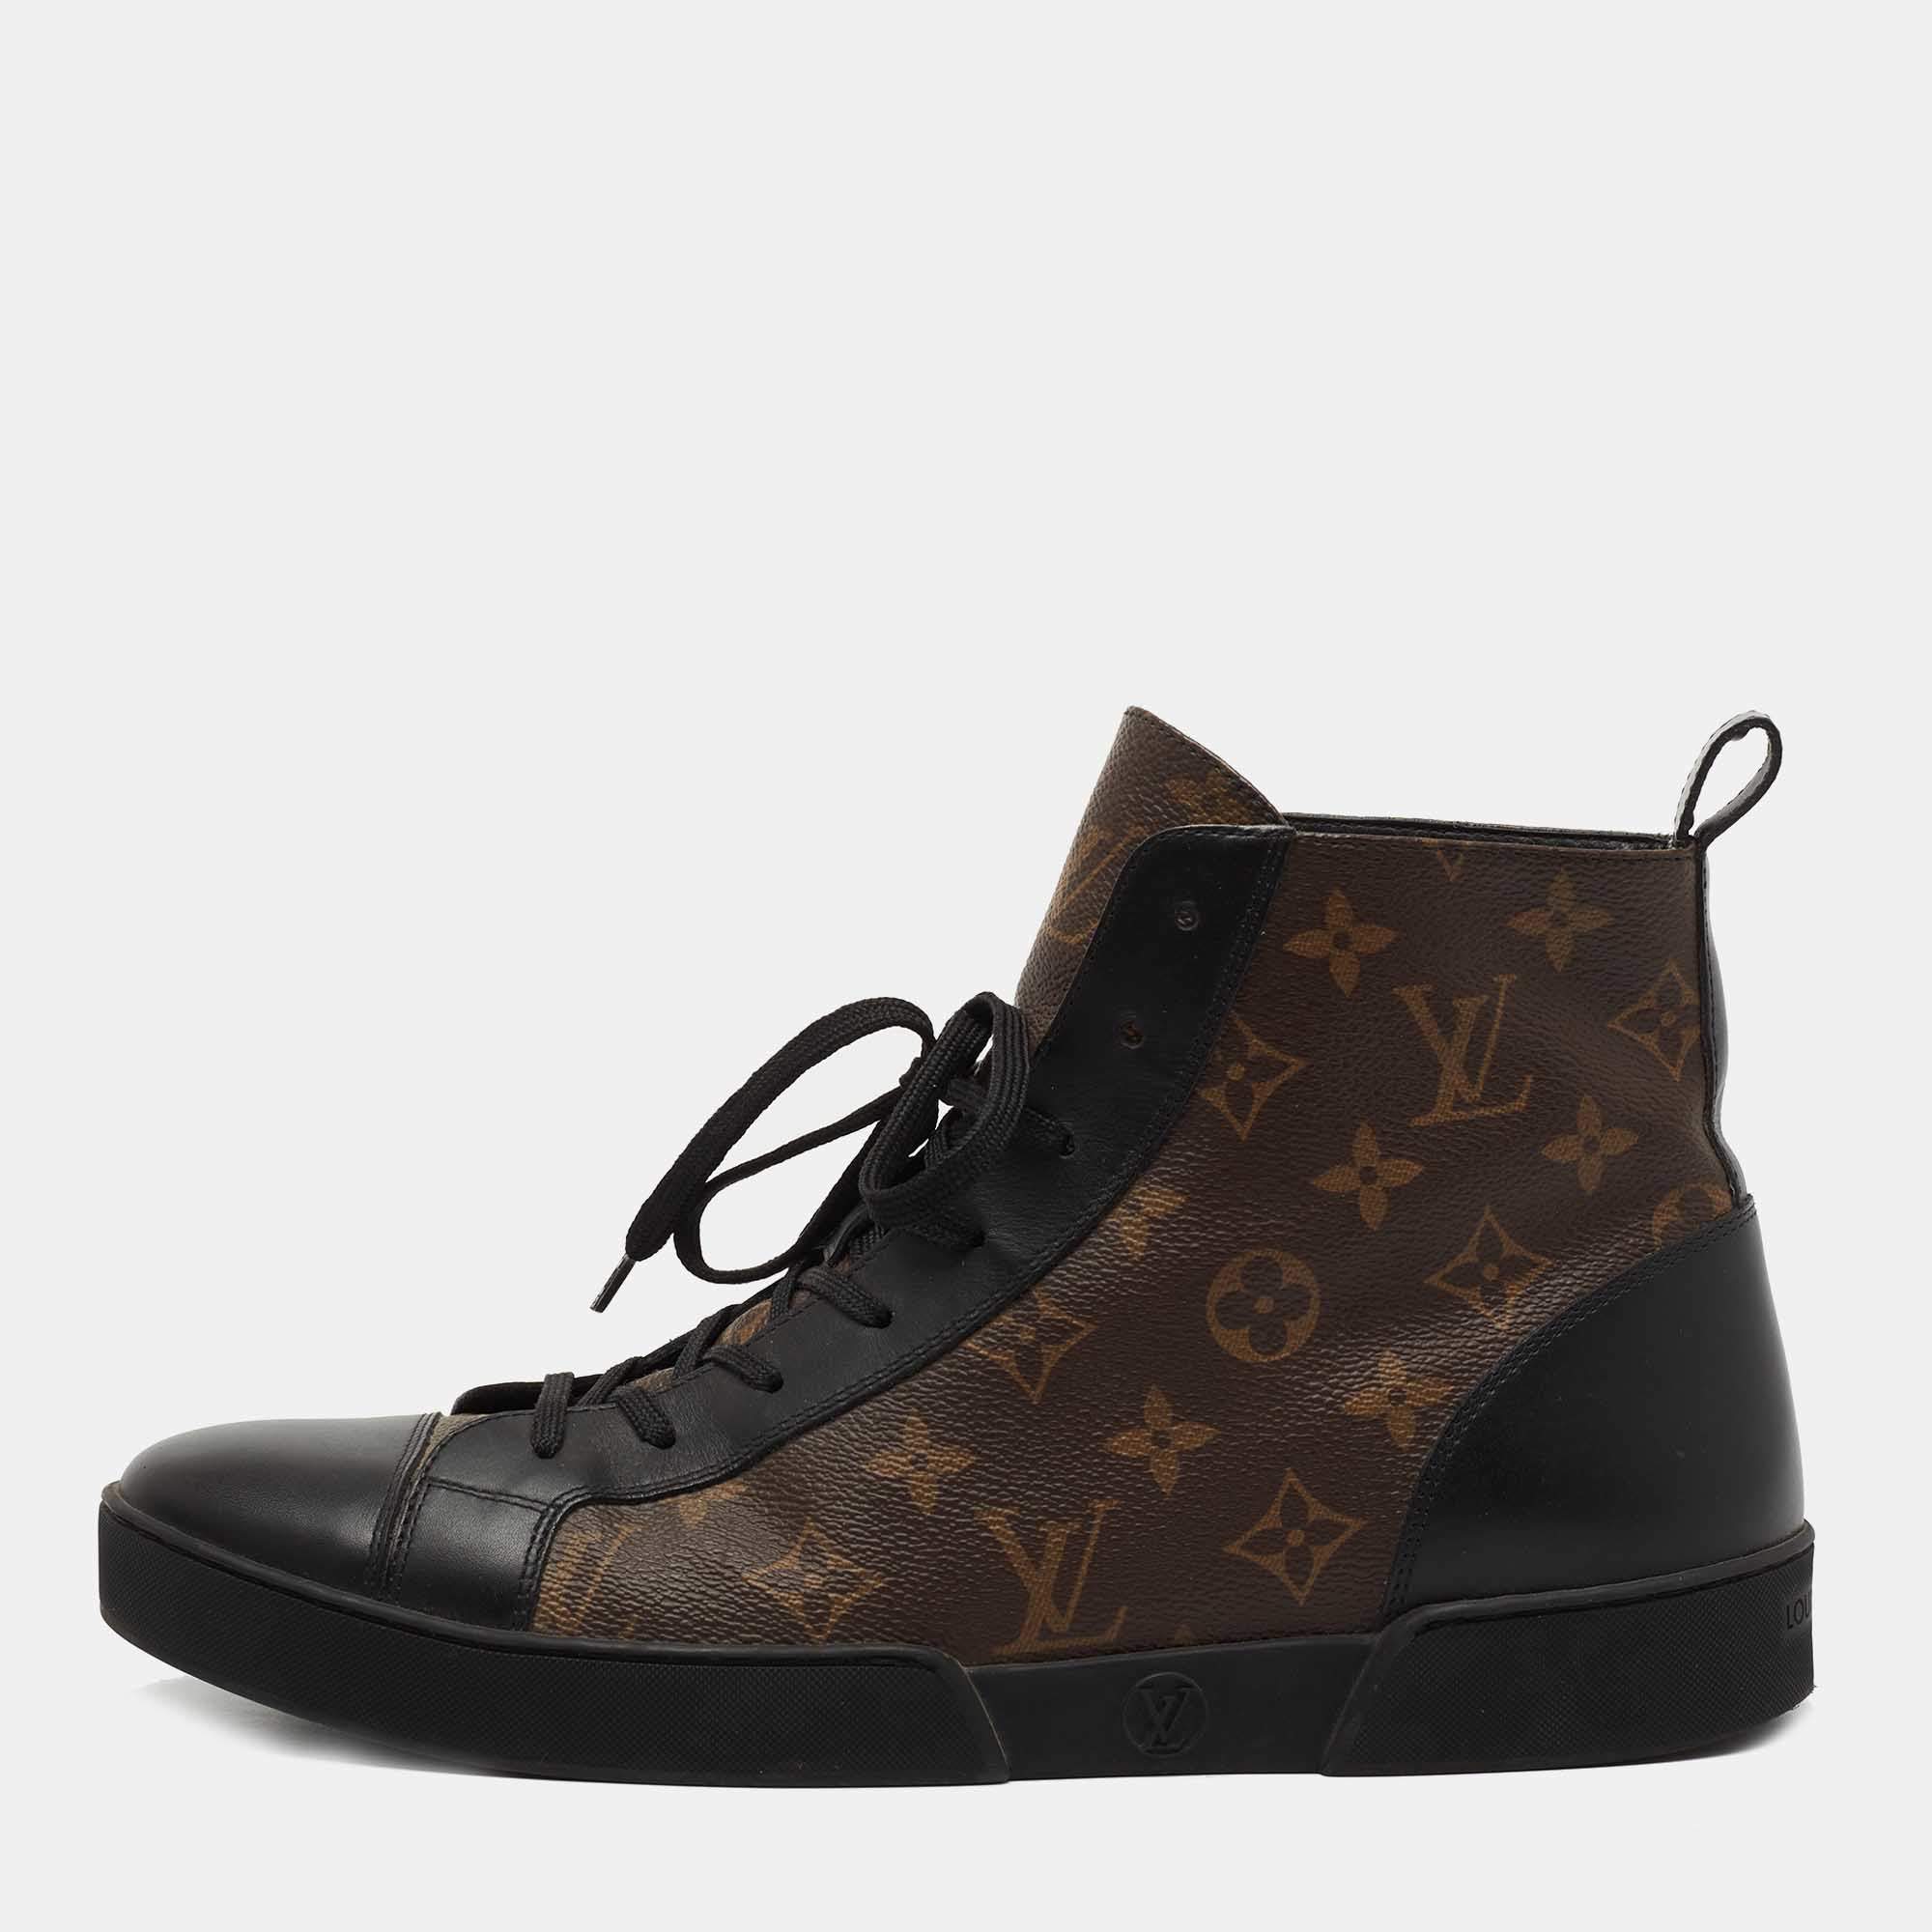 Louis Vuitton Brown Monogram Canvas and Leather Match Up Sneakers Size 42.5